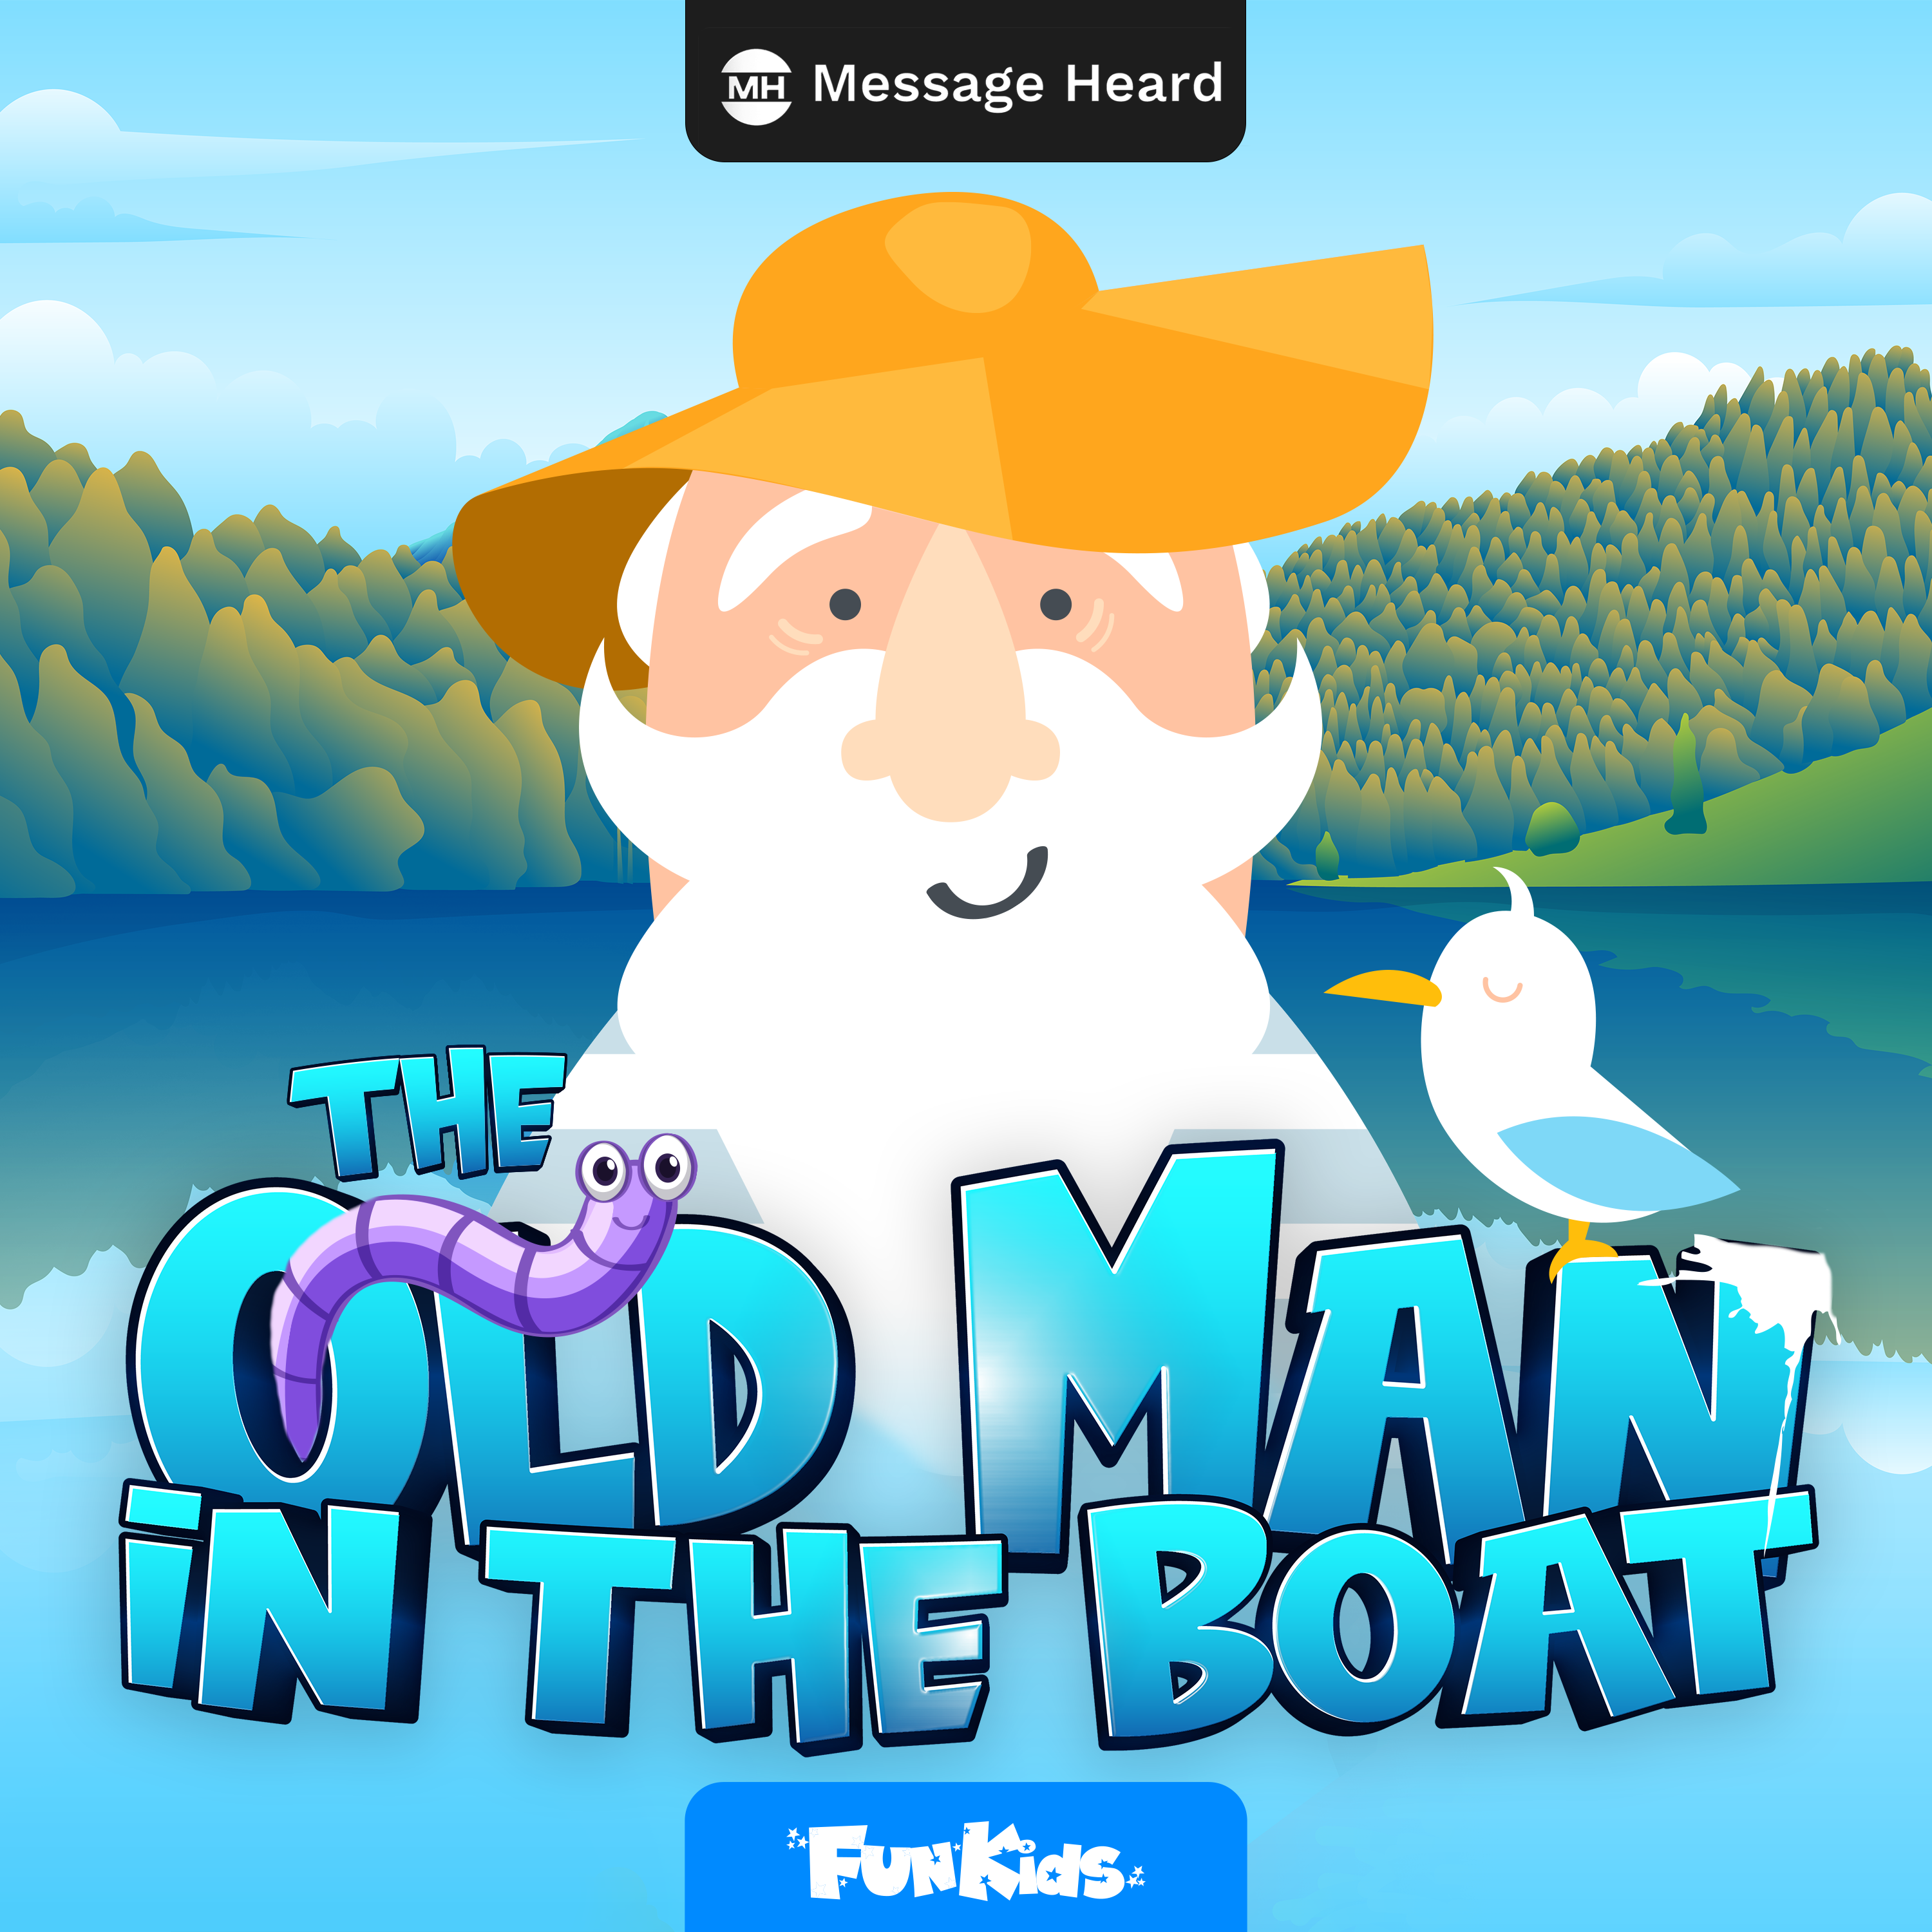 The Old Man in The Boat is coming soon